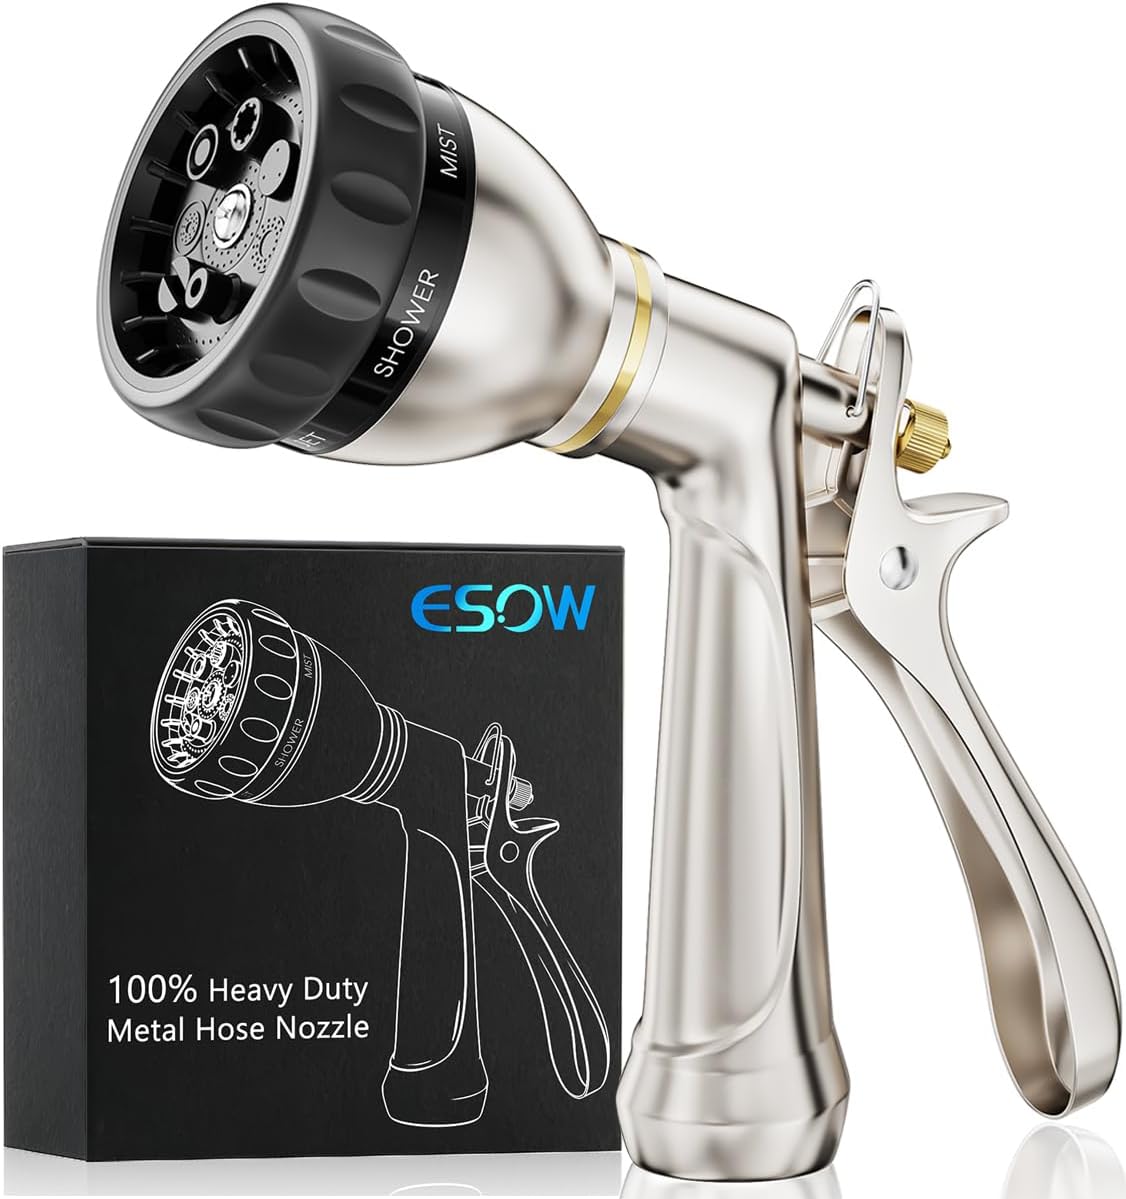 The sellers of the ESOW Garden Hose Nozzle should drop the ES in the name and replace with W...giving WOW. Because thats what I said to myself the minute I removed the product from the box. Made like the spray nozzles of old, this sleek beauty has an all metal body with a showy brushed satin nickel finish. Its a piece of working art, meticulously crafted to perfection.Needless to say, the assembly build is taught and beefy. The rubberized bezel dial that selects the 7-spray patterns rotate